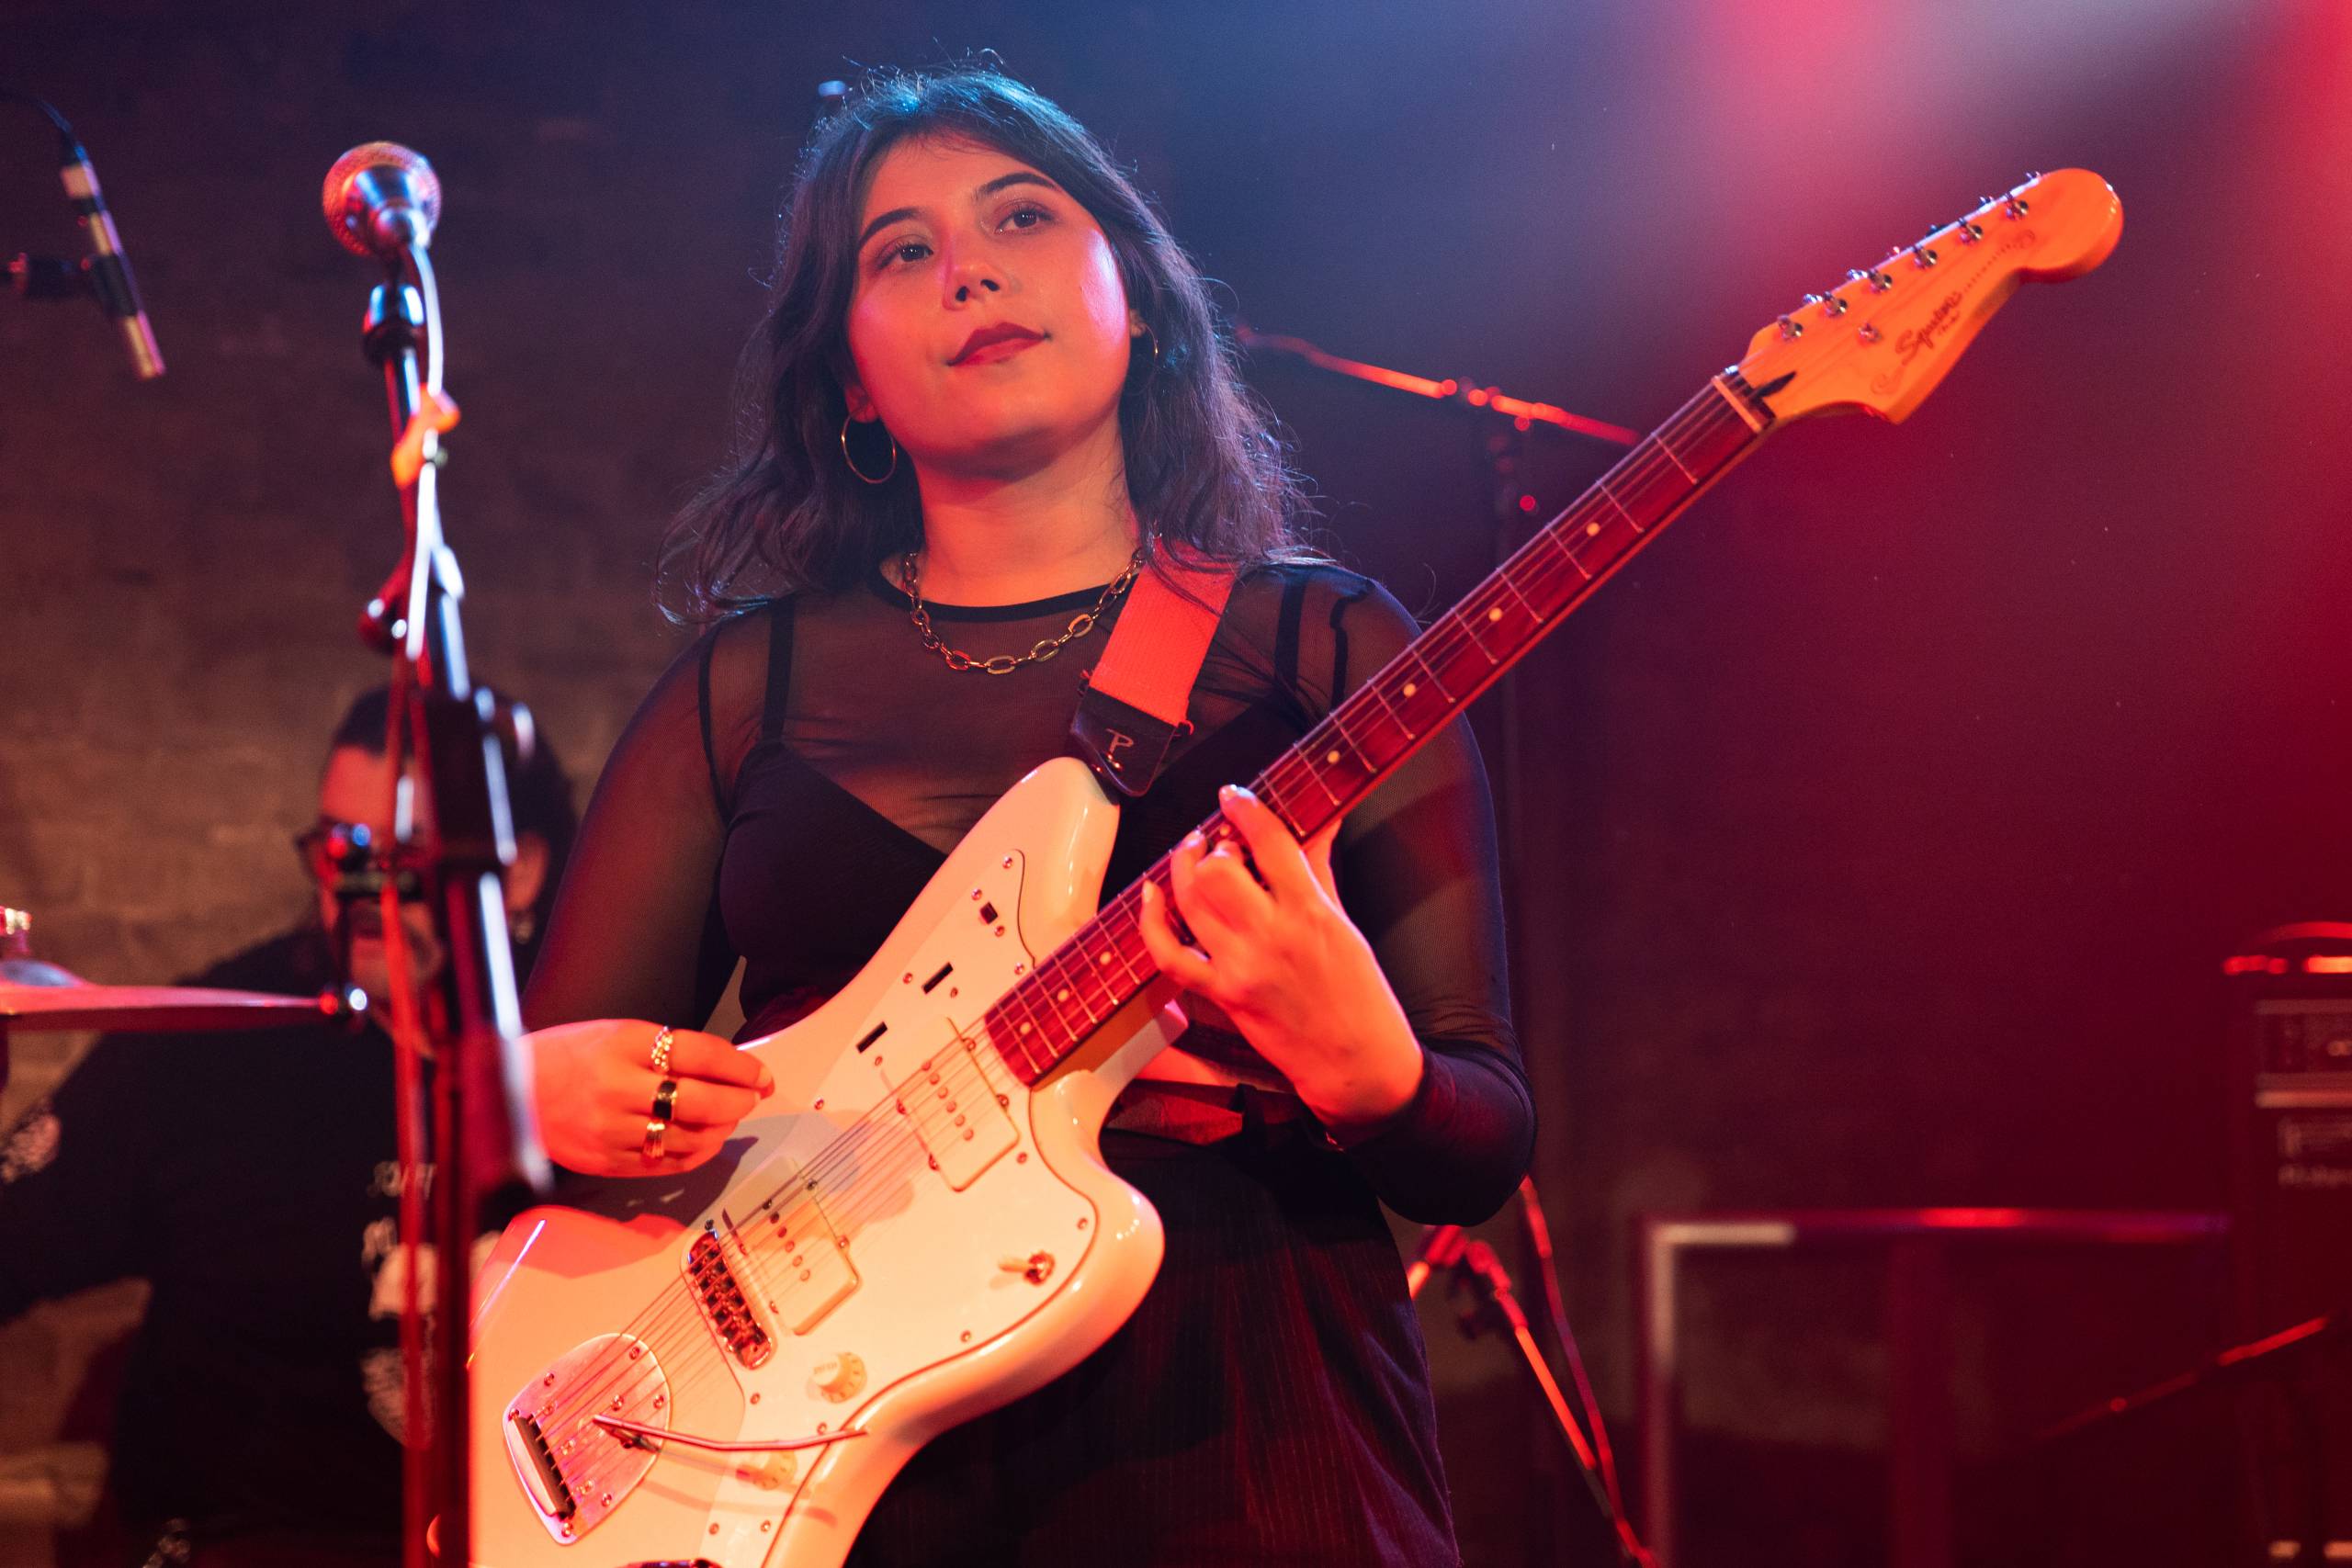 a young woman with dark hair and a dark dress plays a white guitar on stage in purple lighting